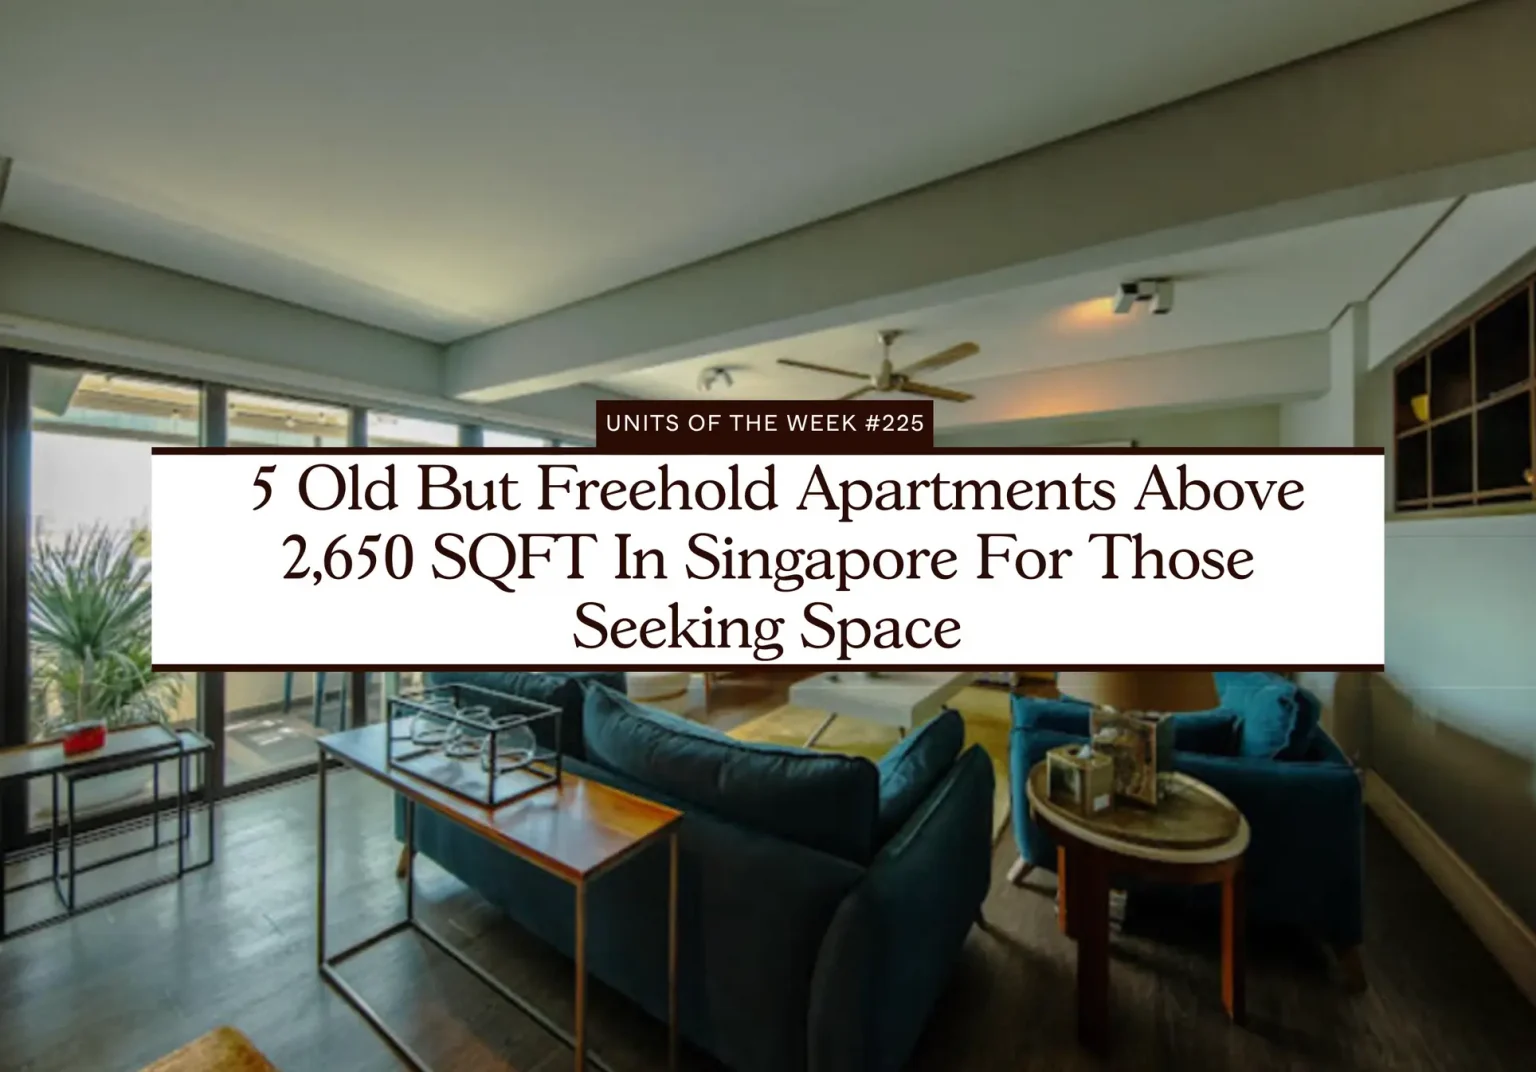 5 Old But Freehold Apartments Above 2650 SQFT In Singapore For Those Seeking Space